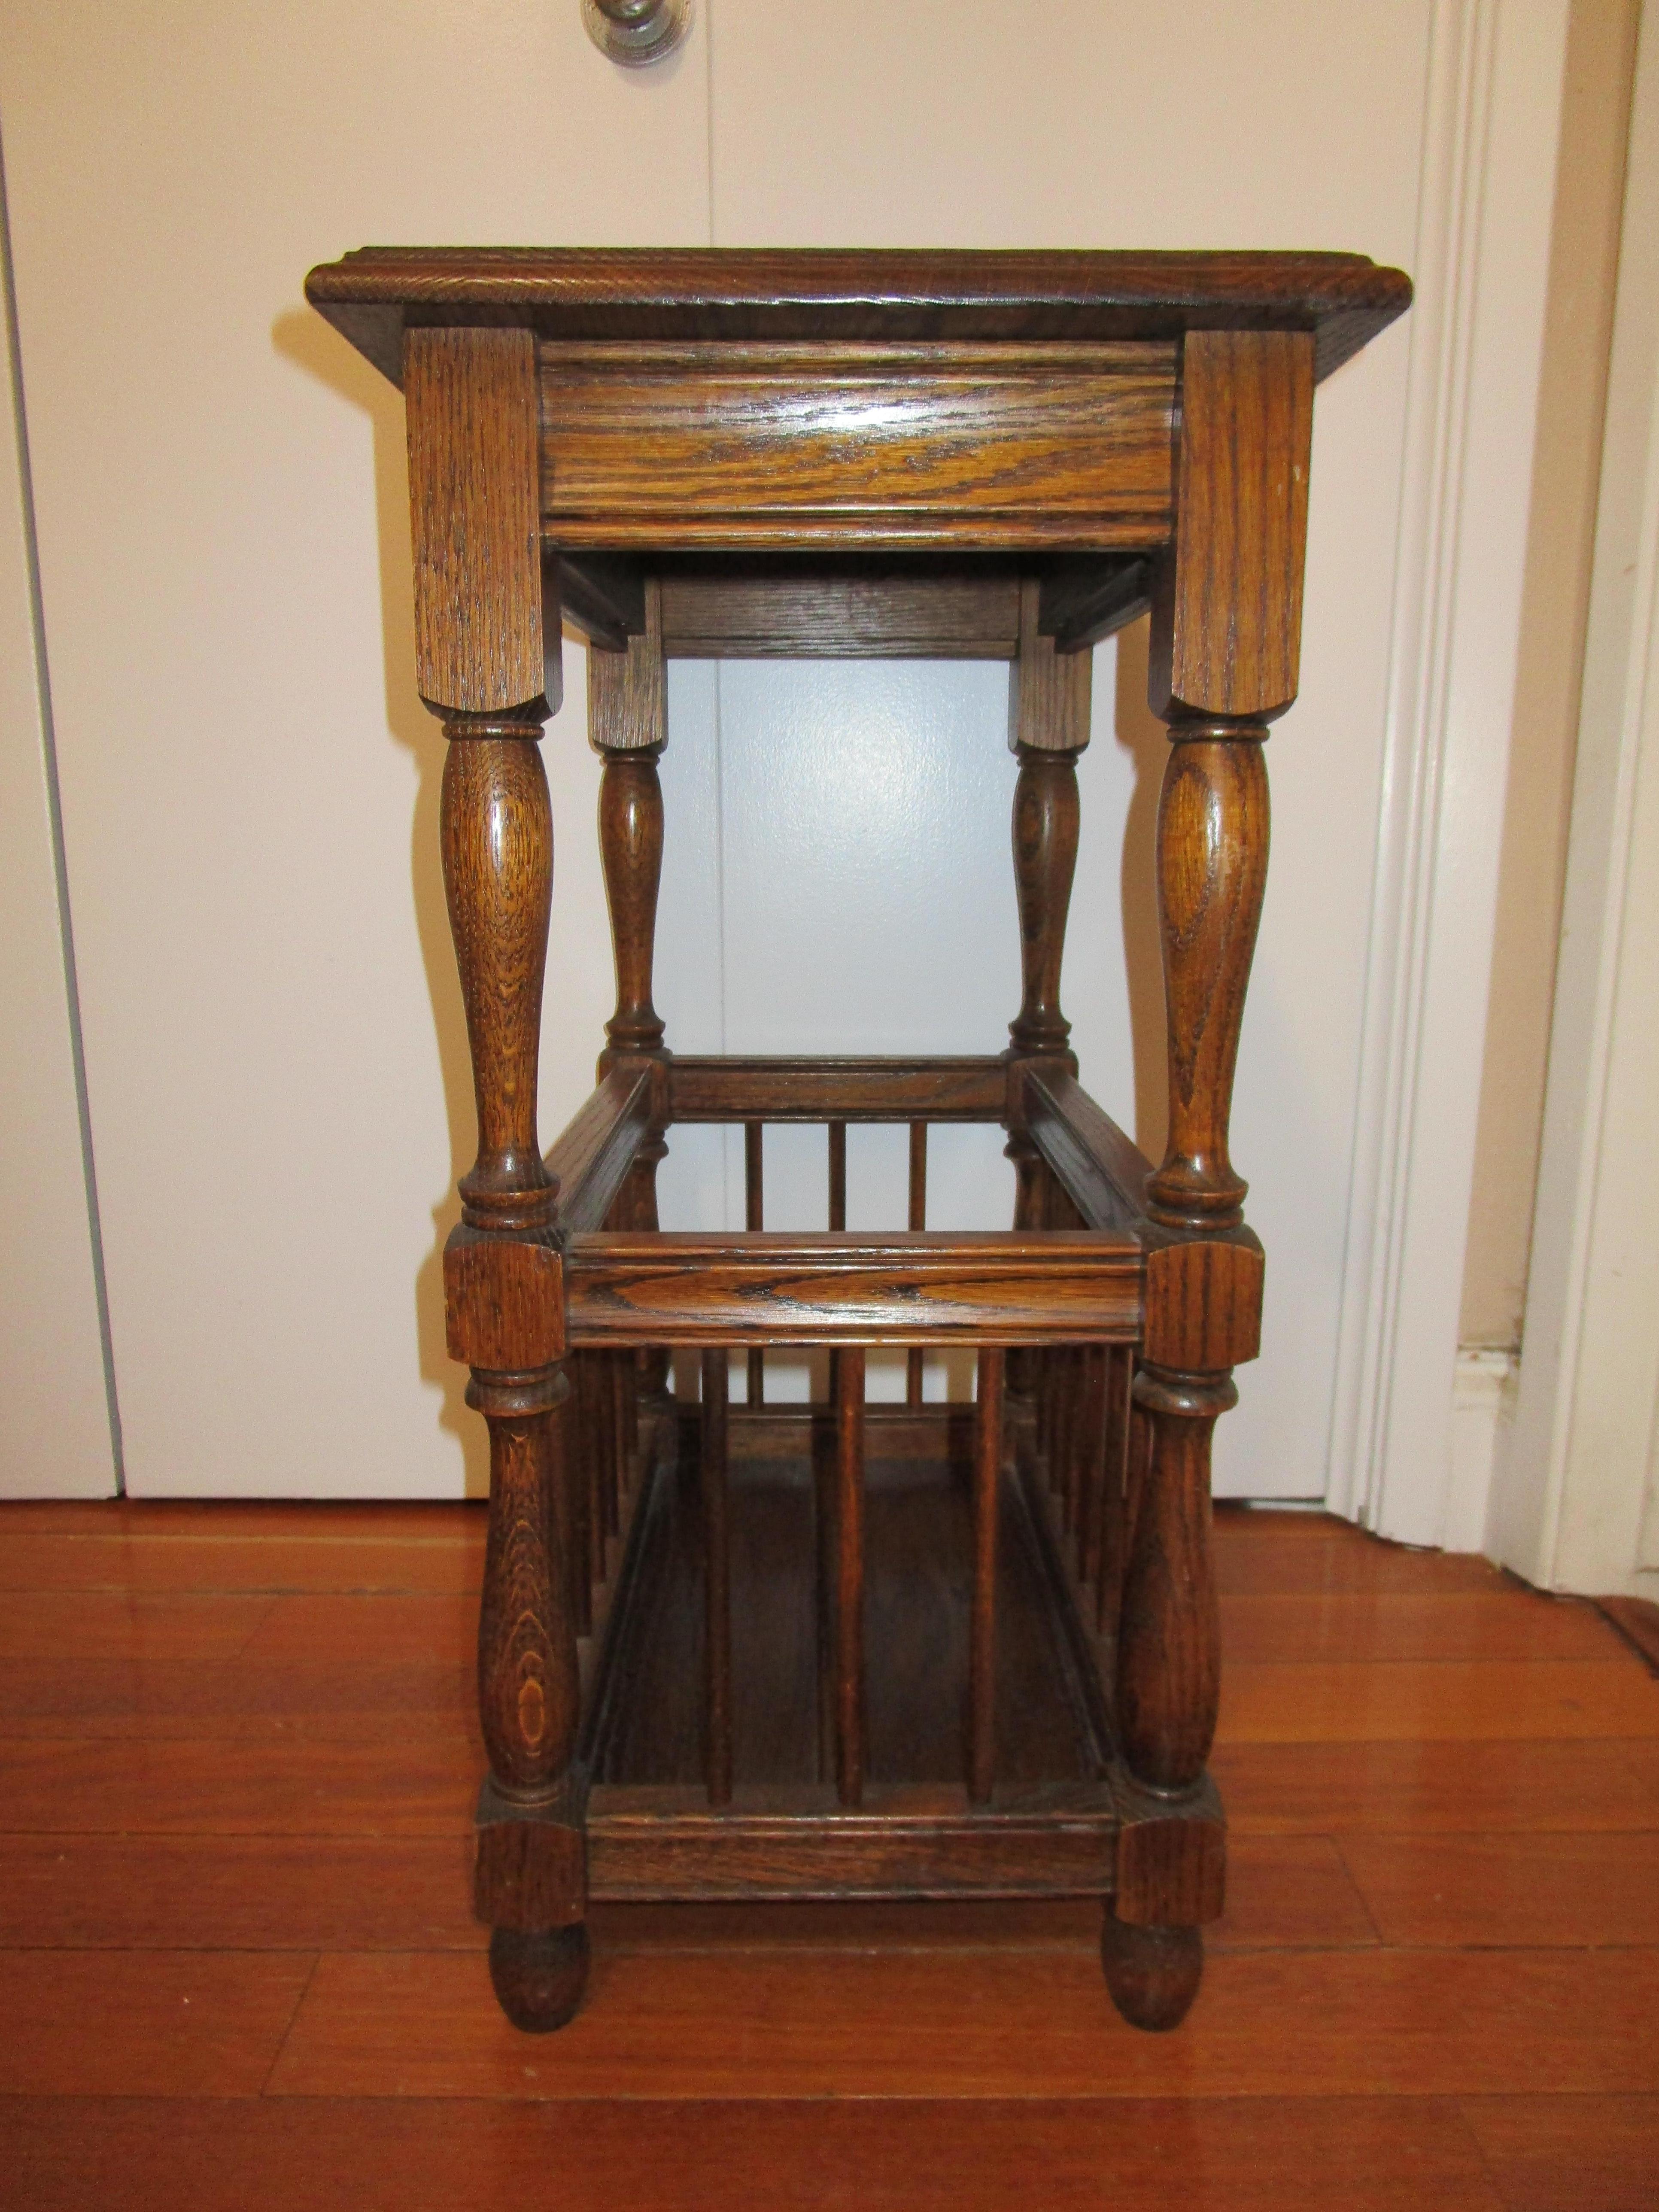 This is a charming occasional piece in the colonial revival style with a functional area for storage or display of culinary or other items, your choice!. It is vintage Colonial turned pine from the mid 20th century. 
The top has a molded edged